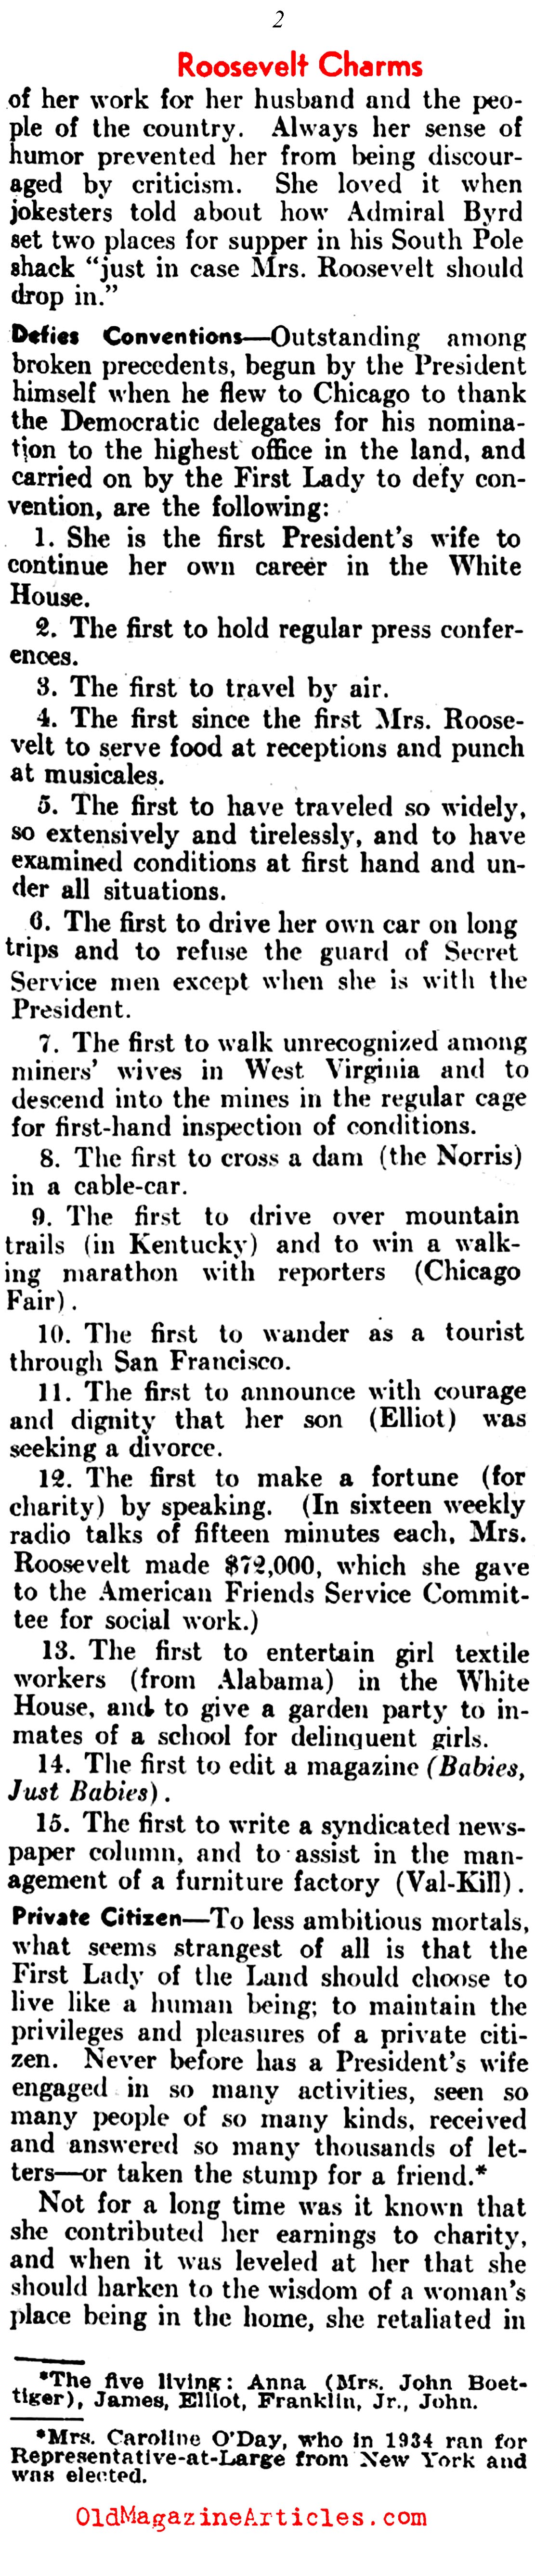 Eleanor Roosevelt and Her Many Firsts (The Literary Digest, 1937)